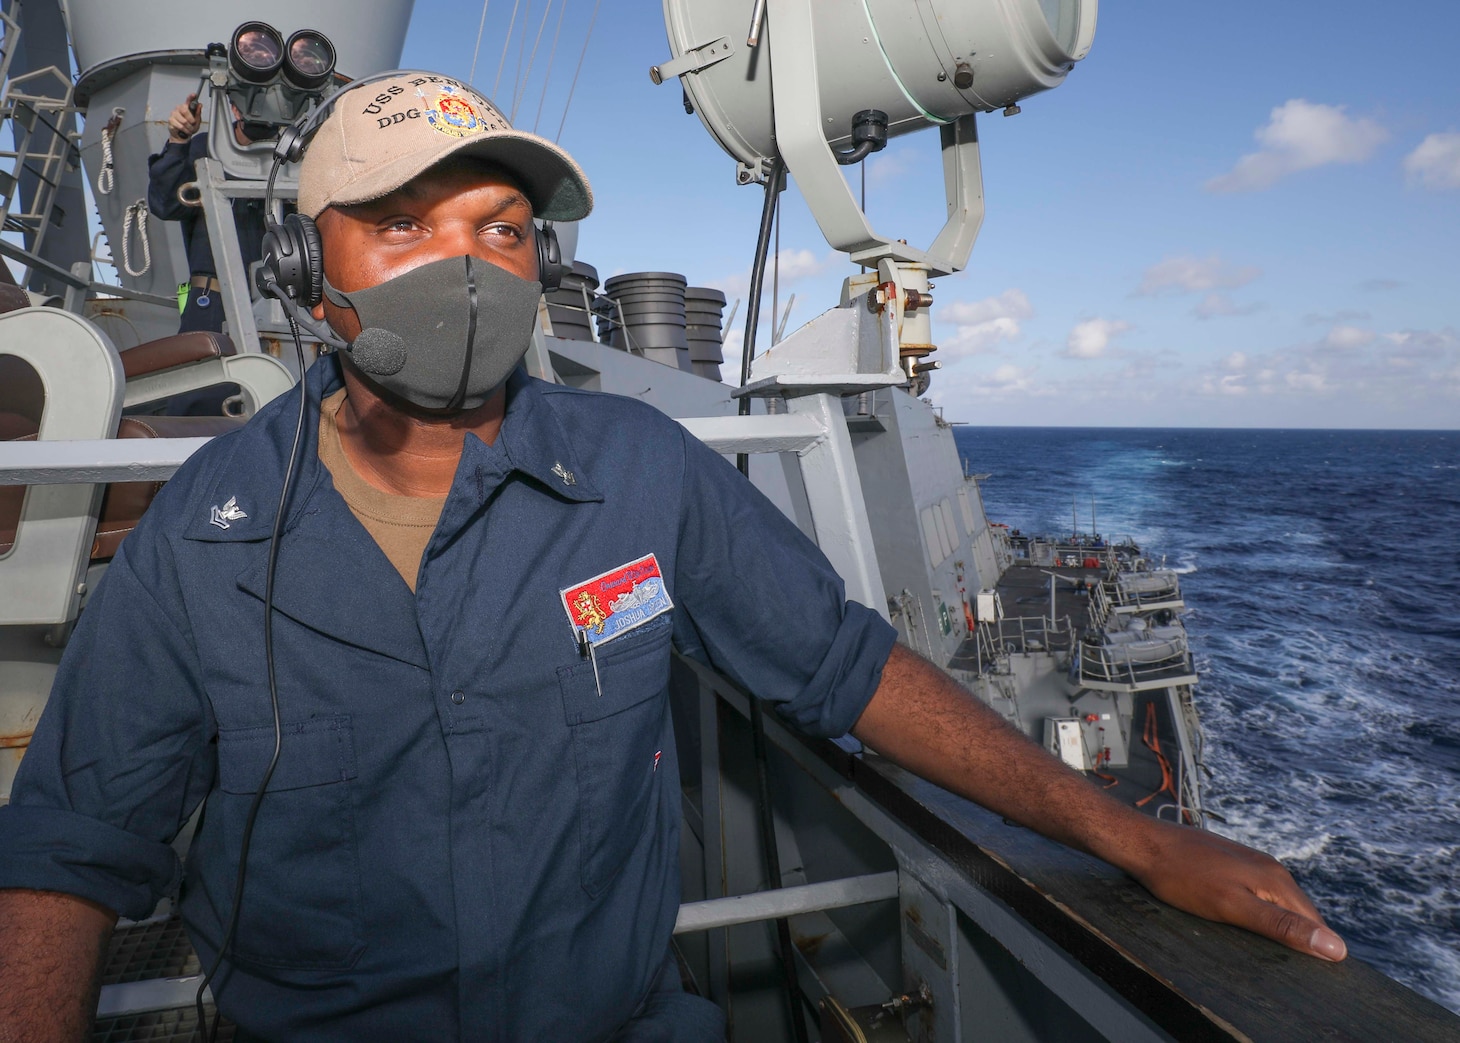 Logistics Specialist Joshua Green, from New Orleans, stands lookout watch on the bridgewing as Arleigh Burke-class guided-missile destroyer USS Benfold (DDG 65) conducts routine underway operations. Benfold is forward-deployed to the U.S. 7th Fleet area of operations in support of a free and open Indo-Pacific.